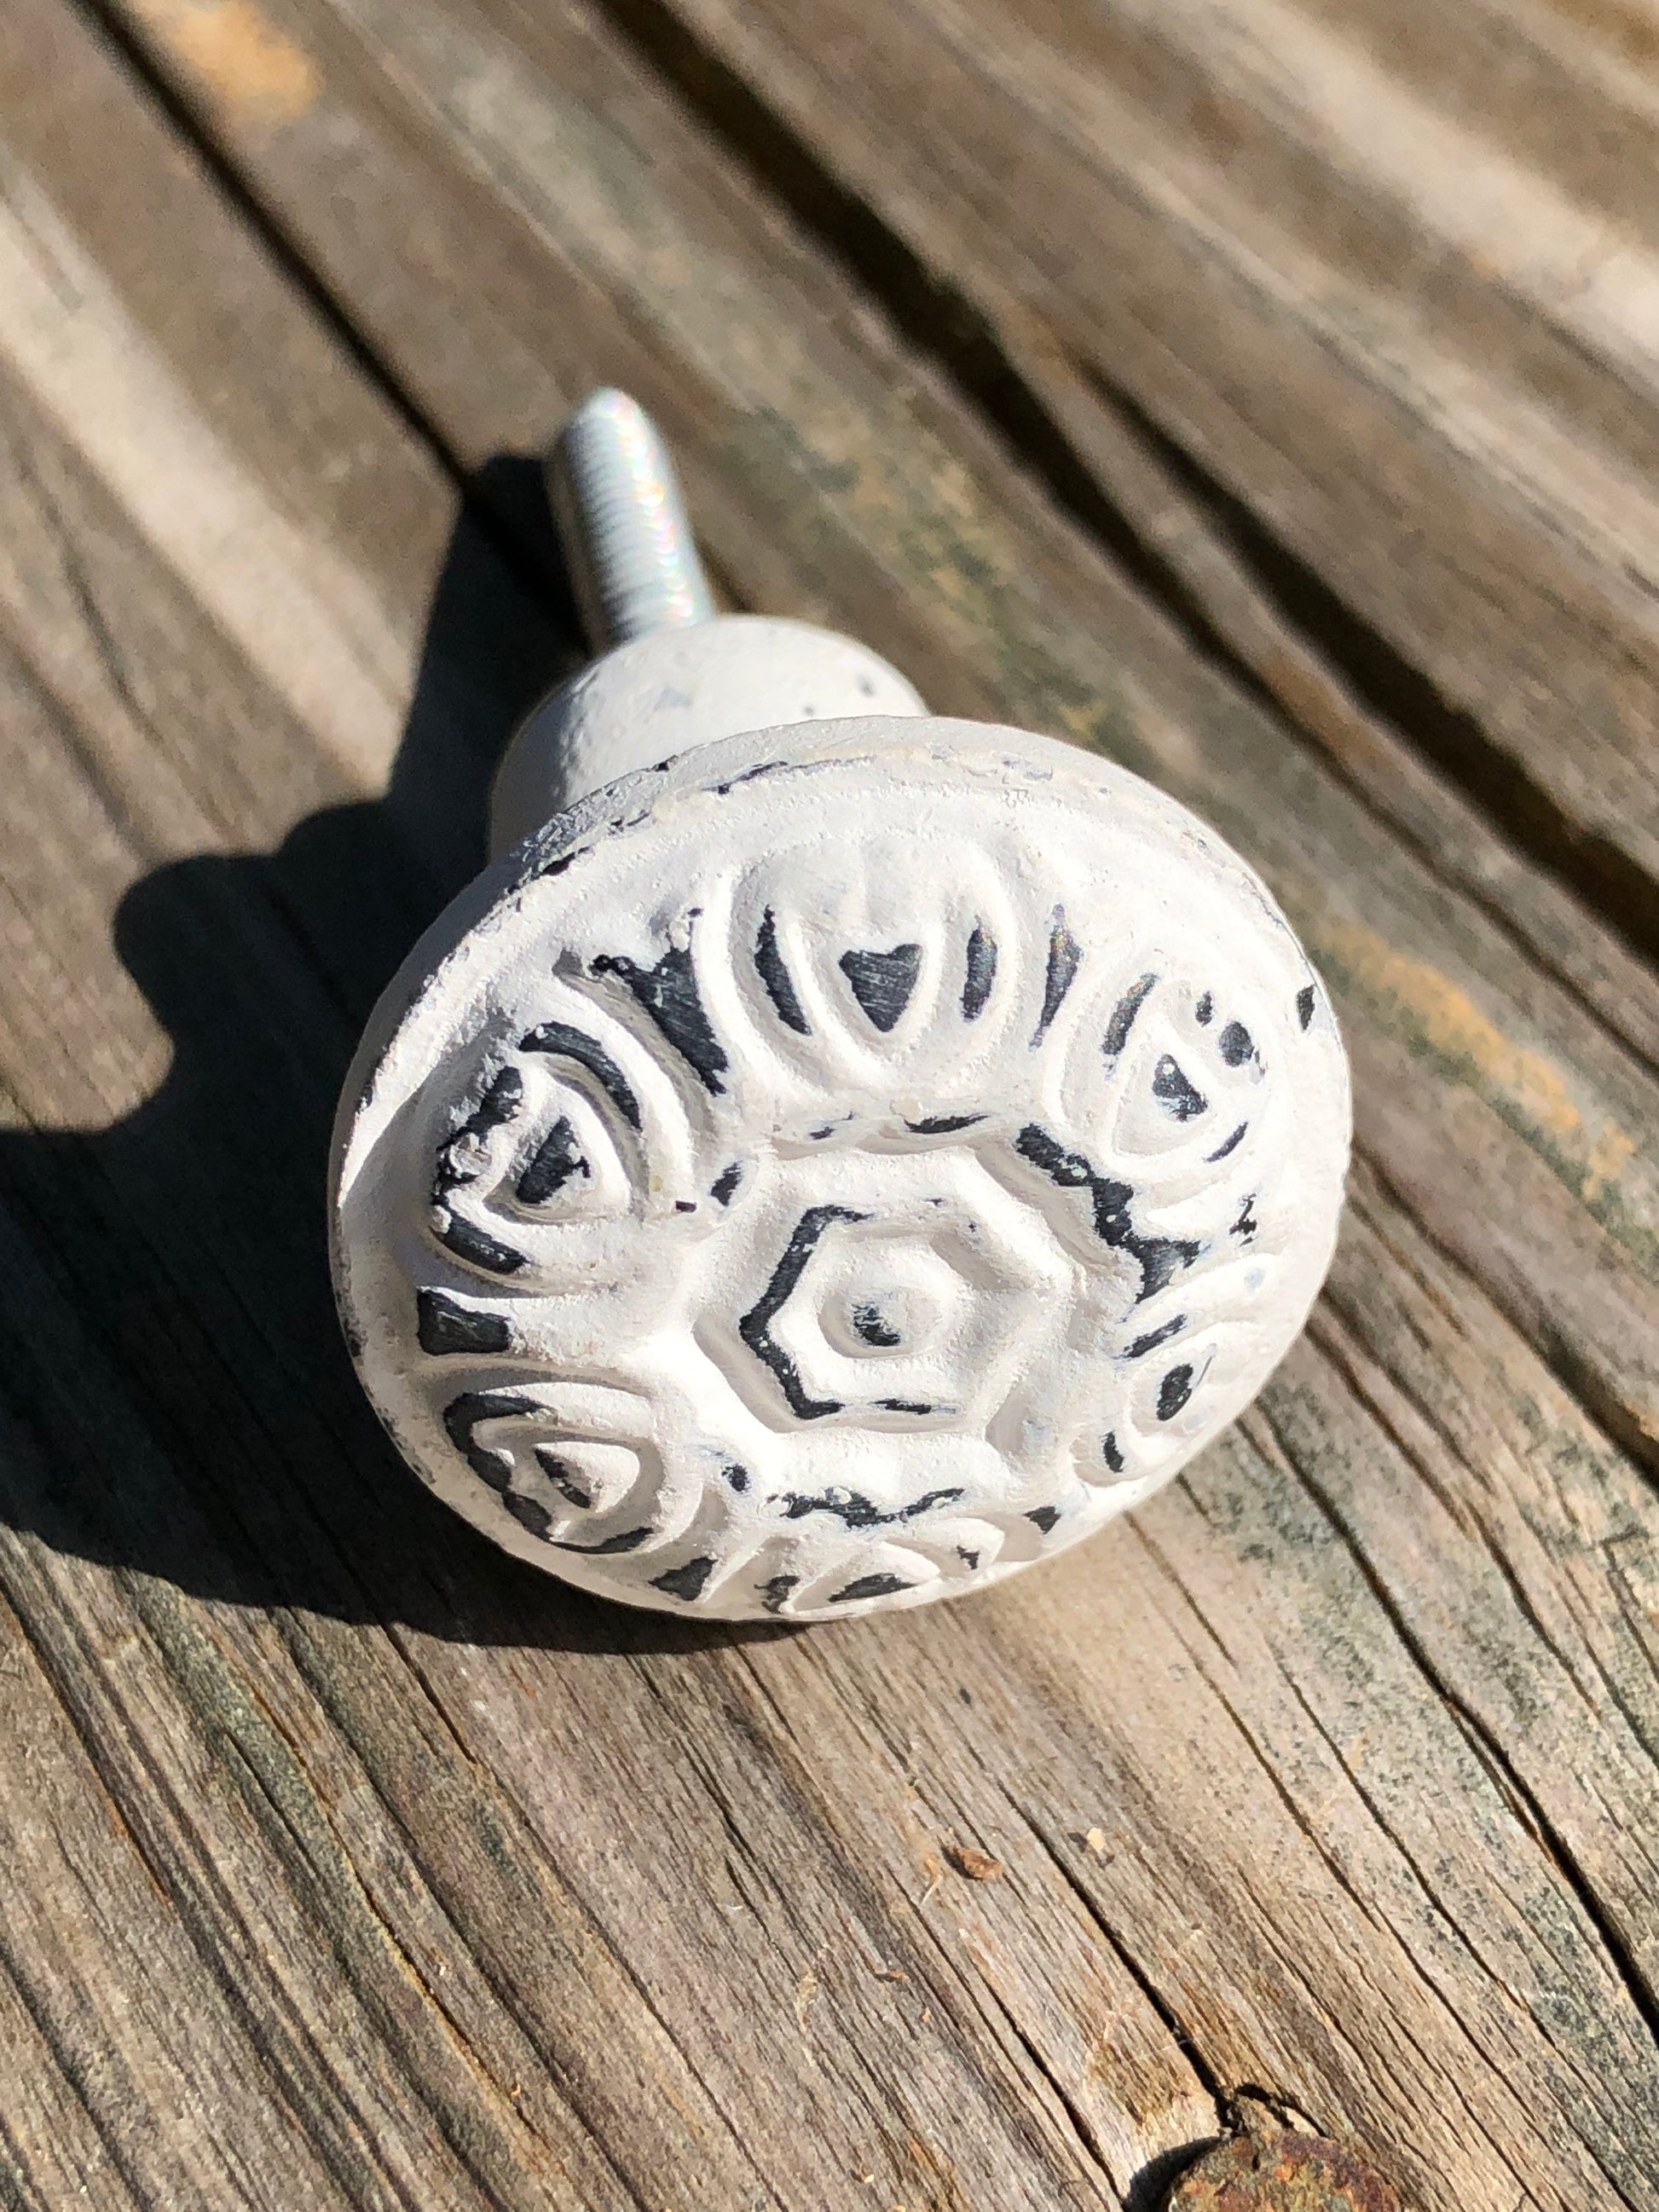 Cottage Chic Knobs / Drawer or Desk Knobs / Dresser Drawer Pulls / Distressed White Knobs / Shabby Chic Style / Cabinet Handles